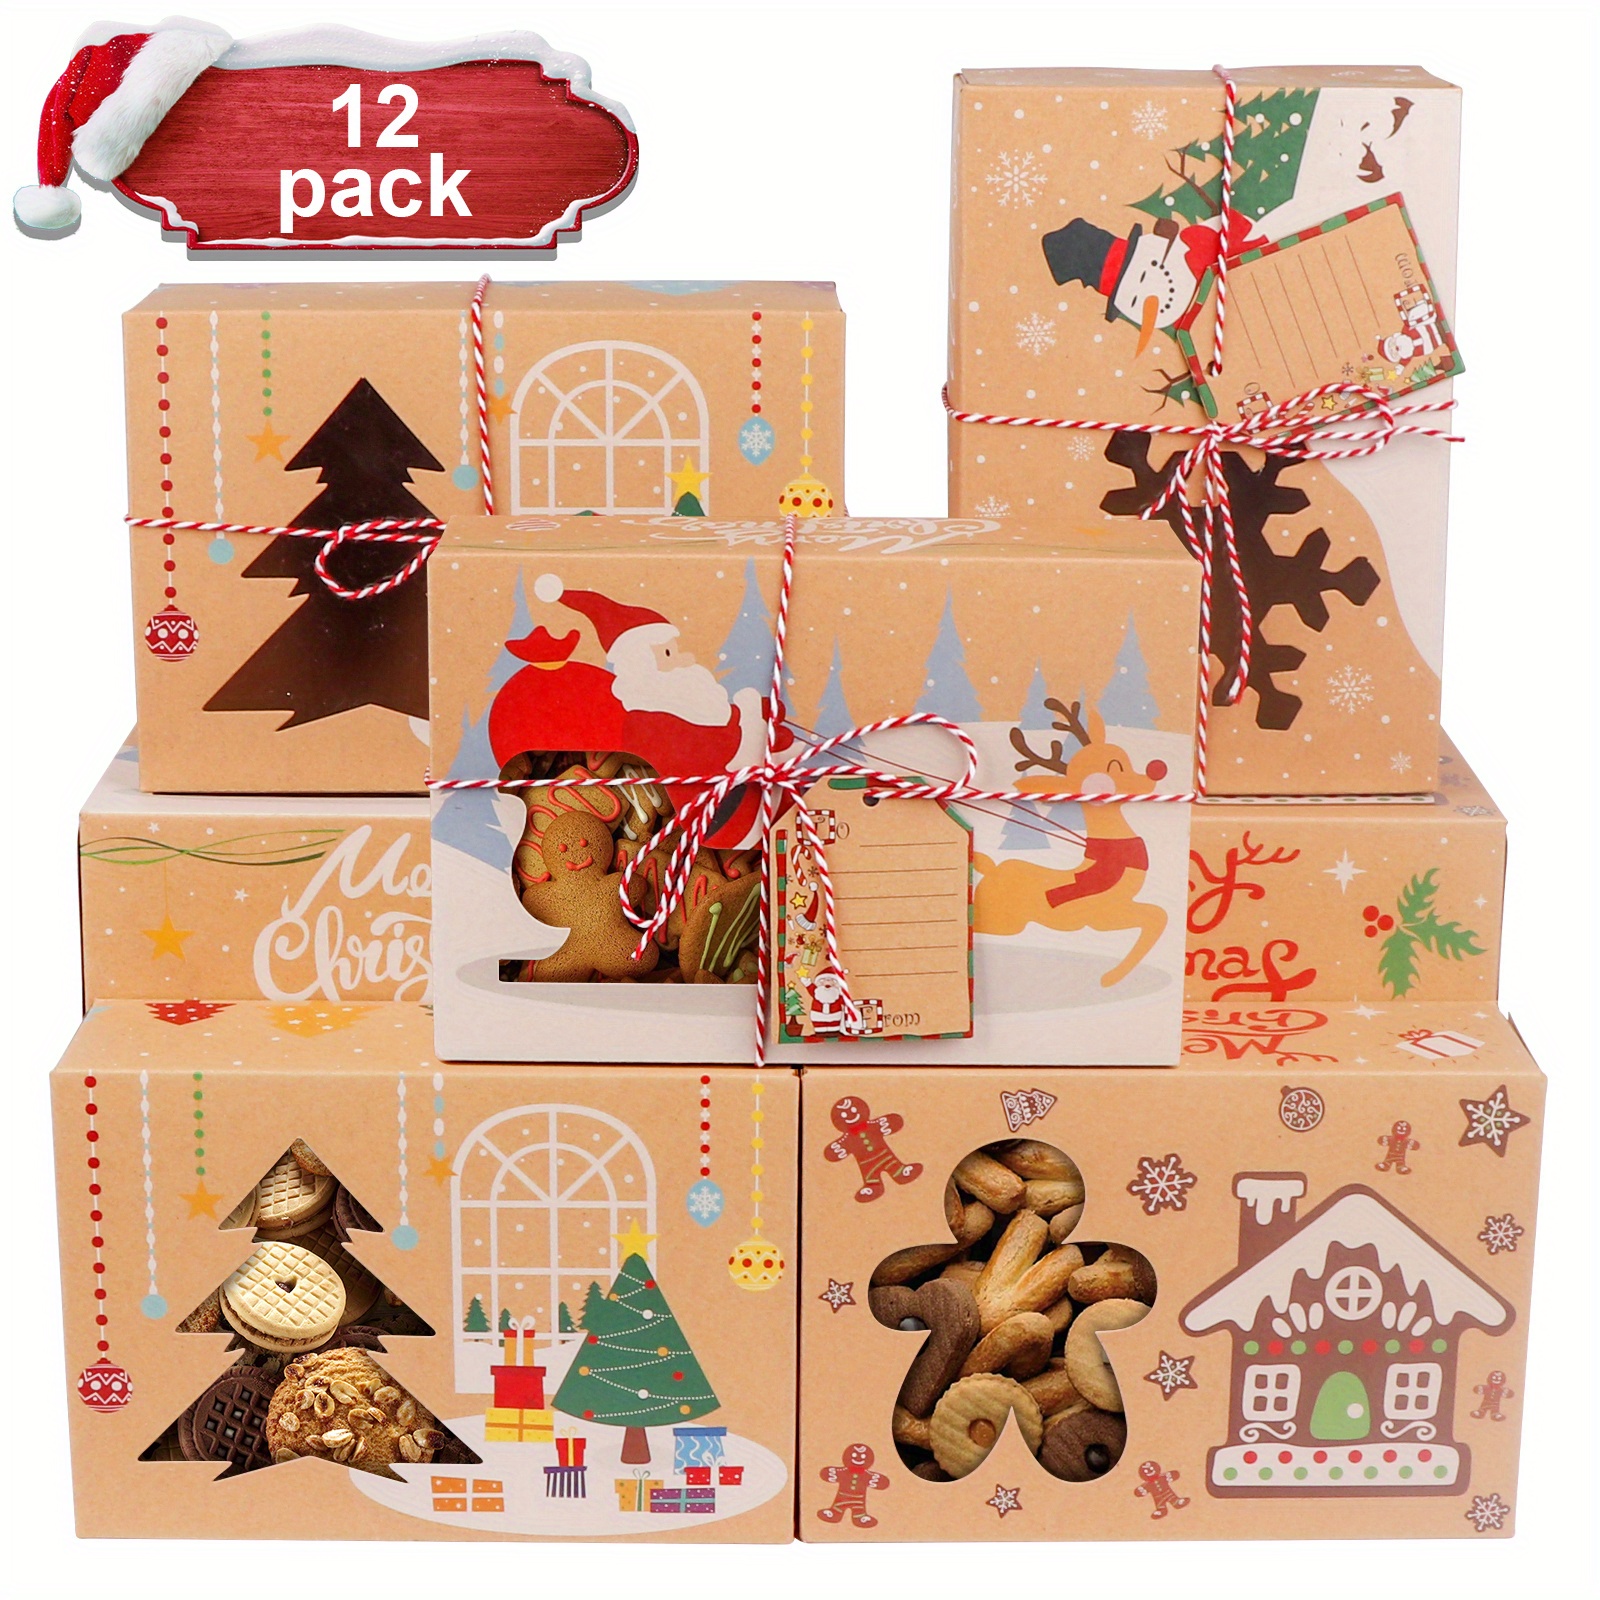  Shinycome 12 Pcs Christmas Cookie Box With Window Holiday Baking  Pastry Treat Boxes Container For Gifts Giving Party Supplies Holiday Baking  Pastry Boxes Food Treat Container: Home & Kitchen